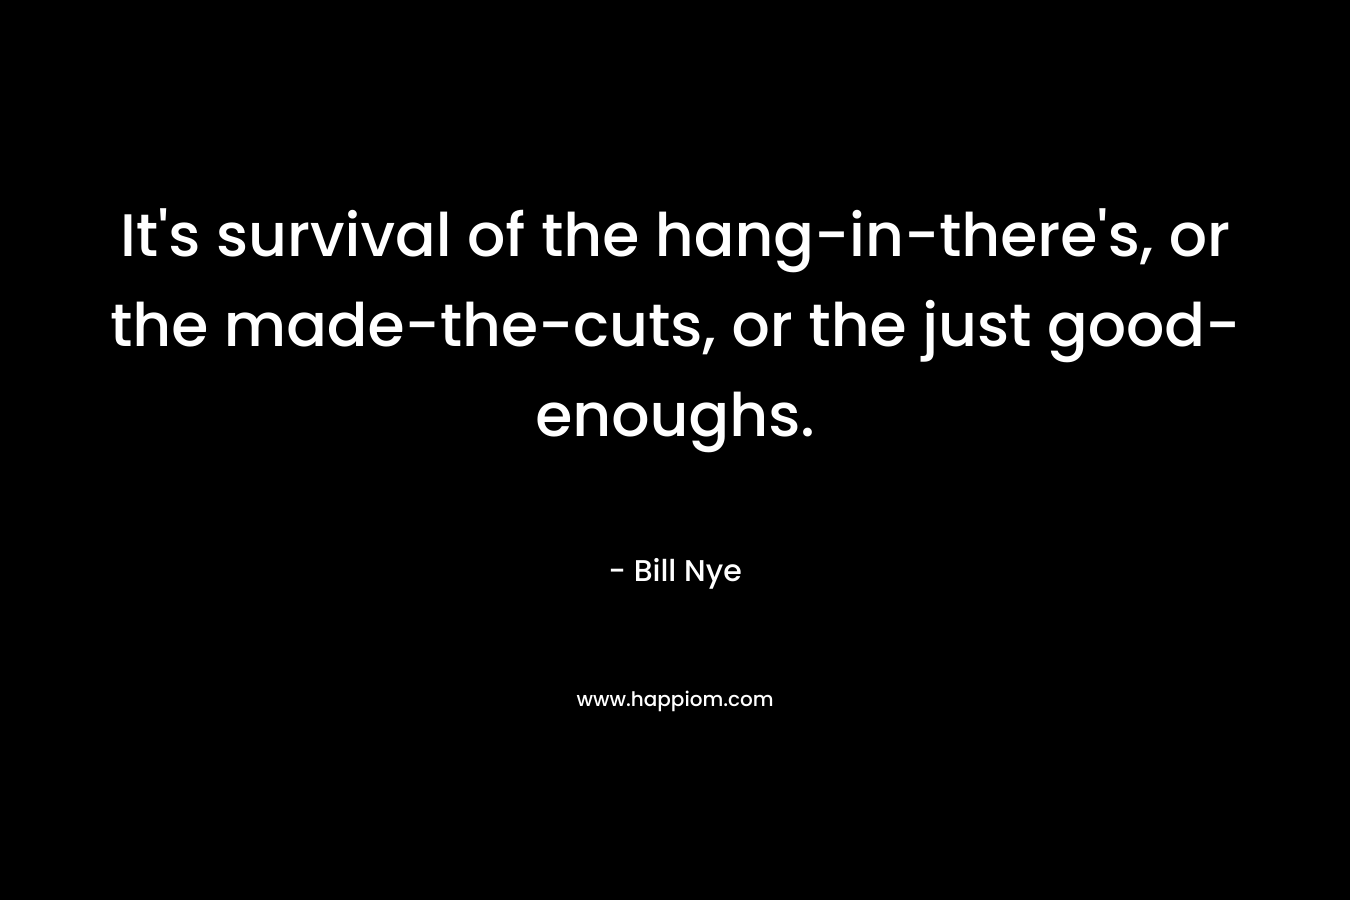 It’s survival of the hang-in-there’s, or the made-the-cuts, or the just good-enoughs. – Bill  Nye